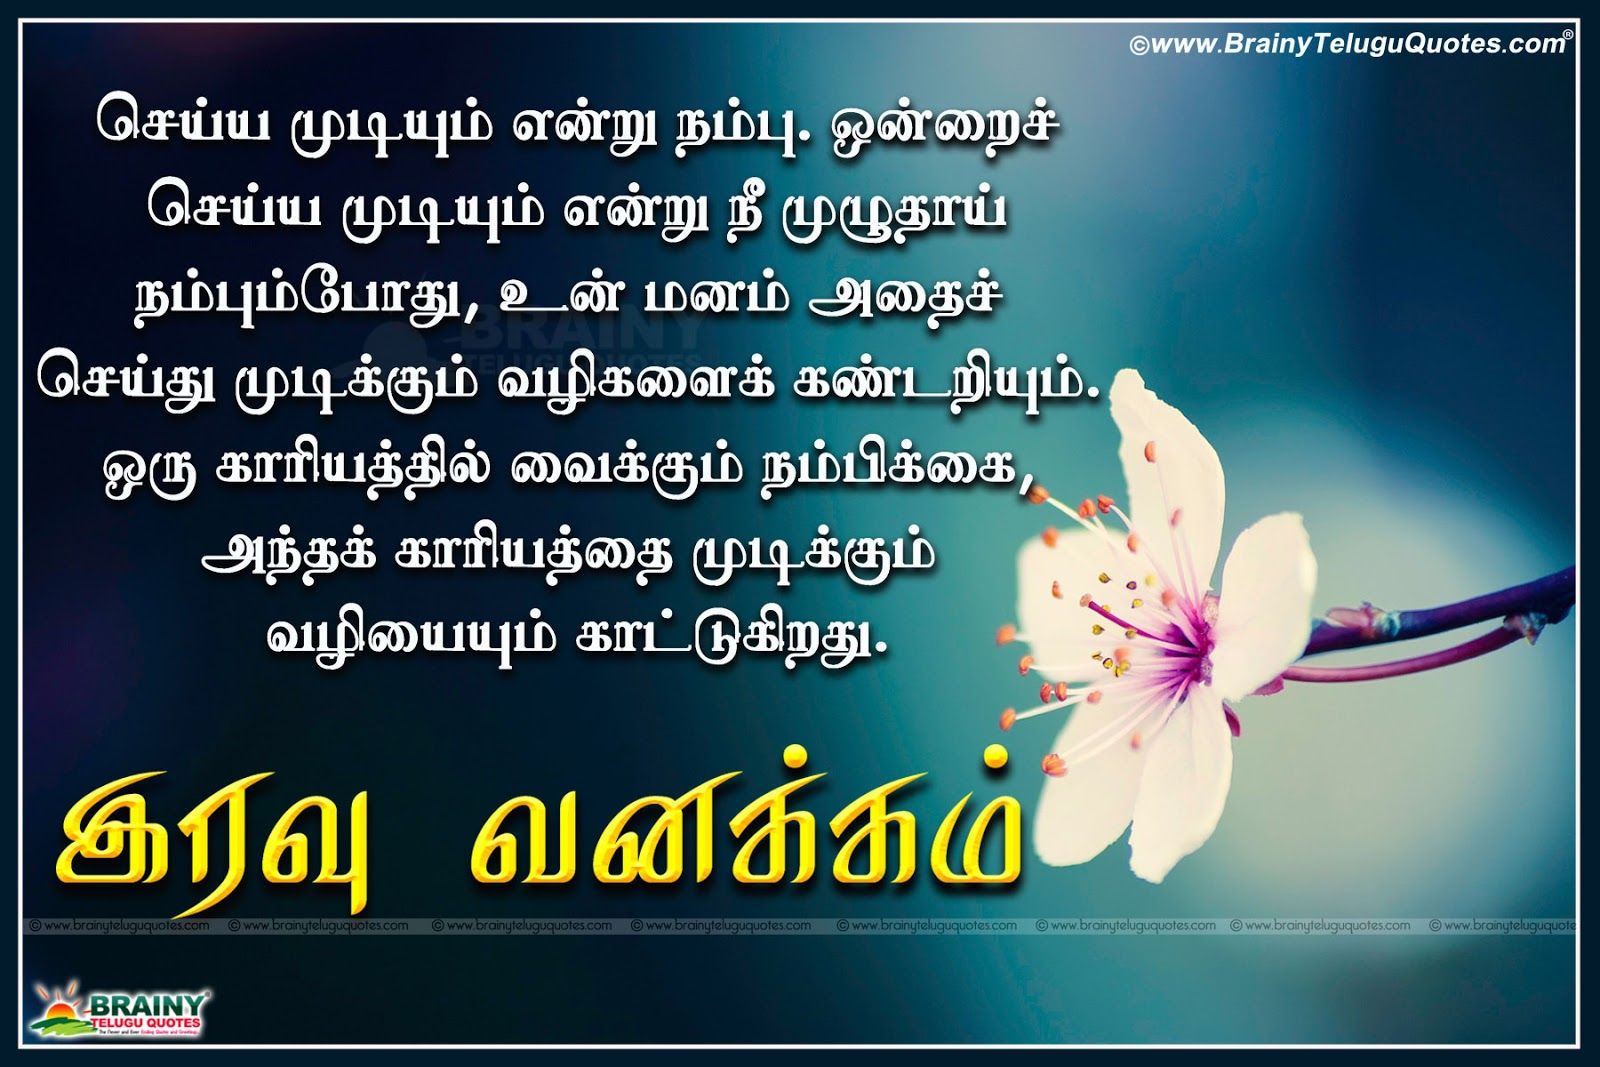 Tamil true Words about Life with Good Night quotes Image